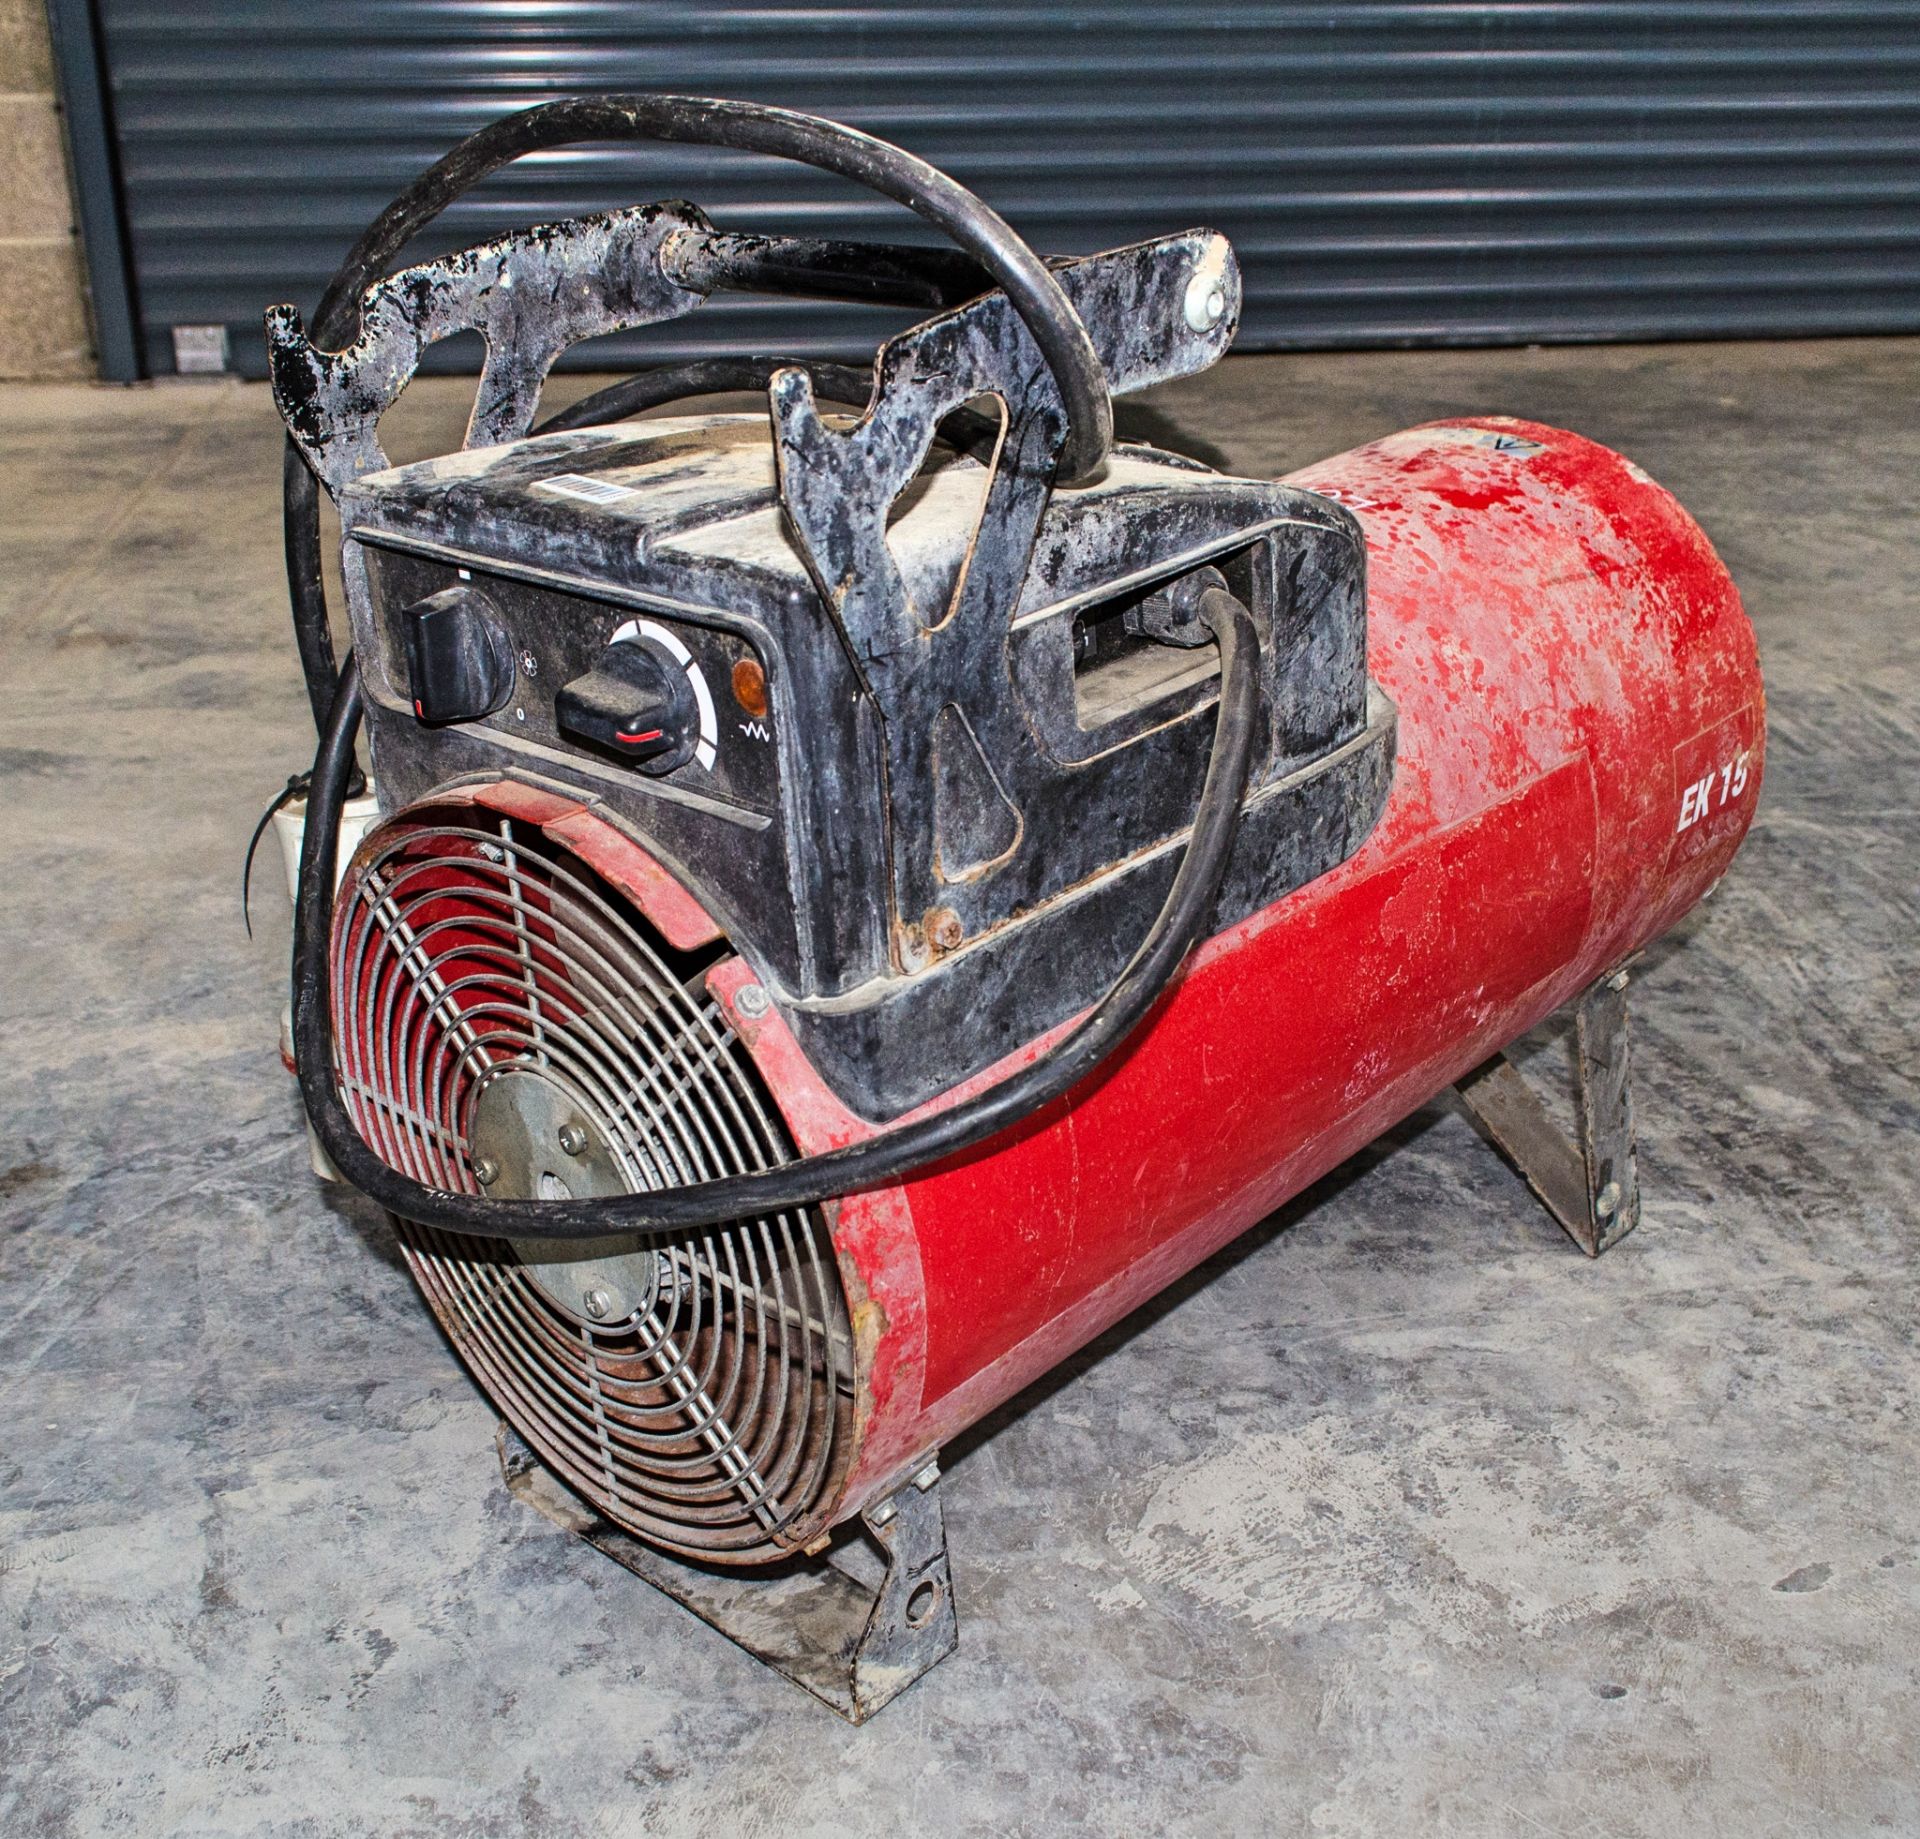 Arcotherm Biemmedue EK15 3 phase gas fired space heater - Image 2 of 2